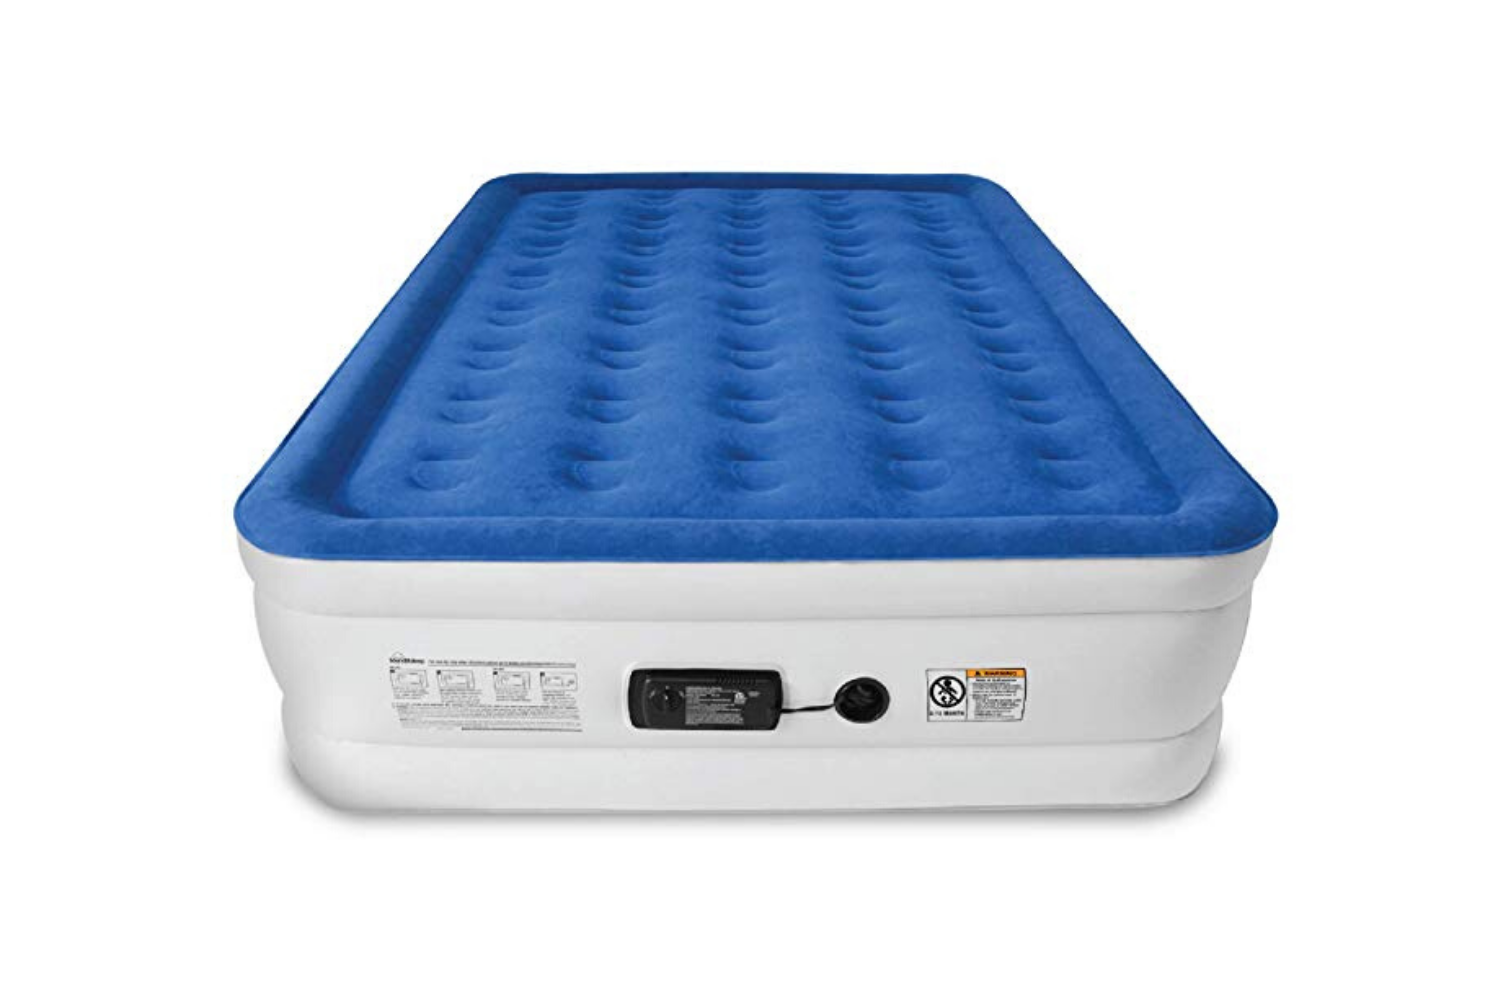 6 Best Air Mattresses for Holiday Guests